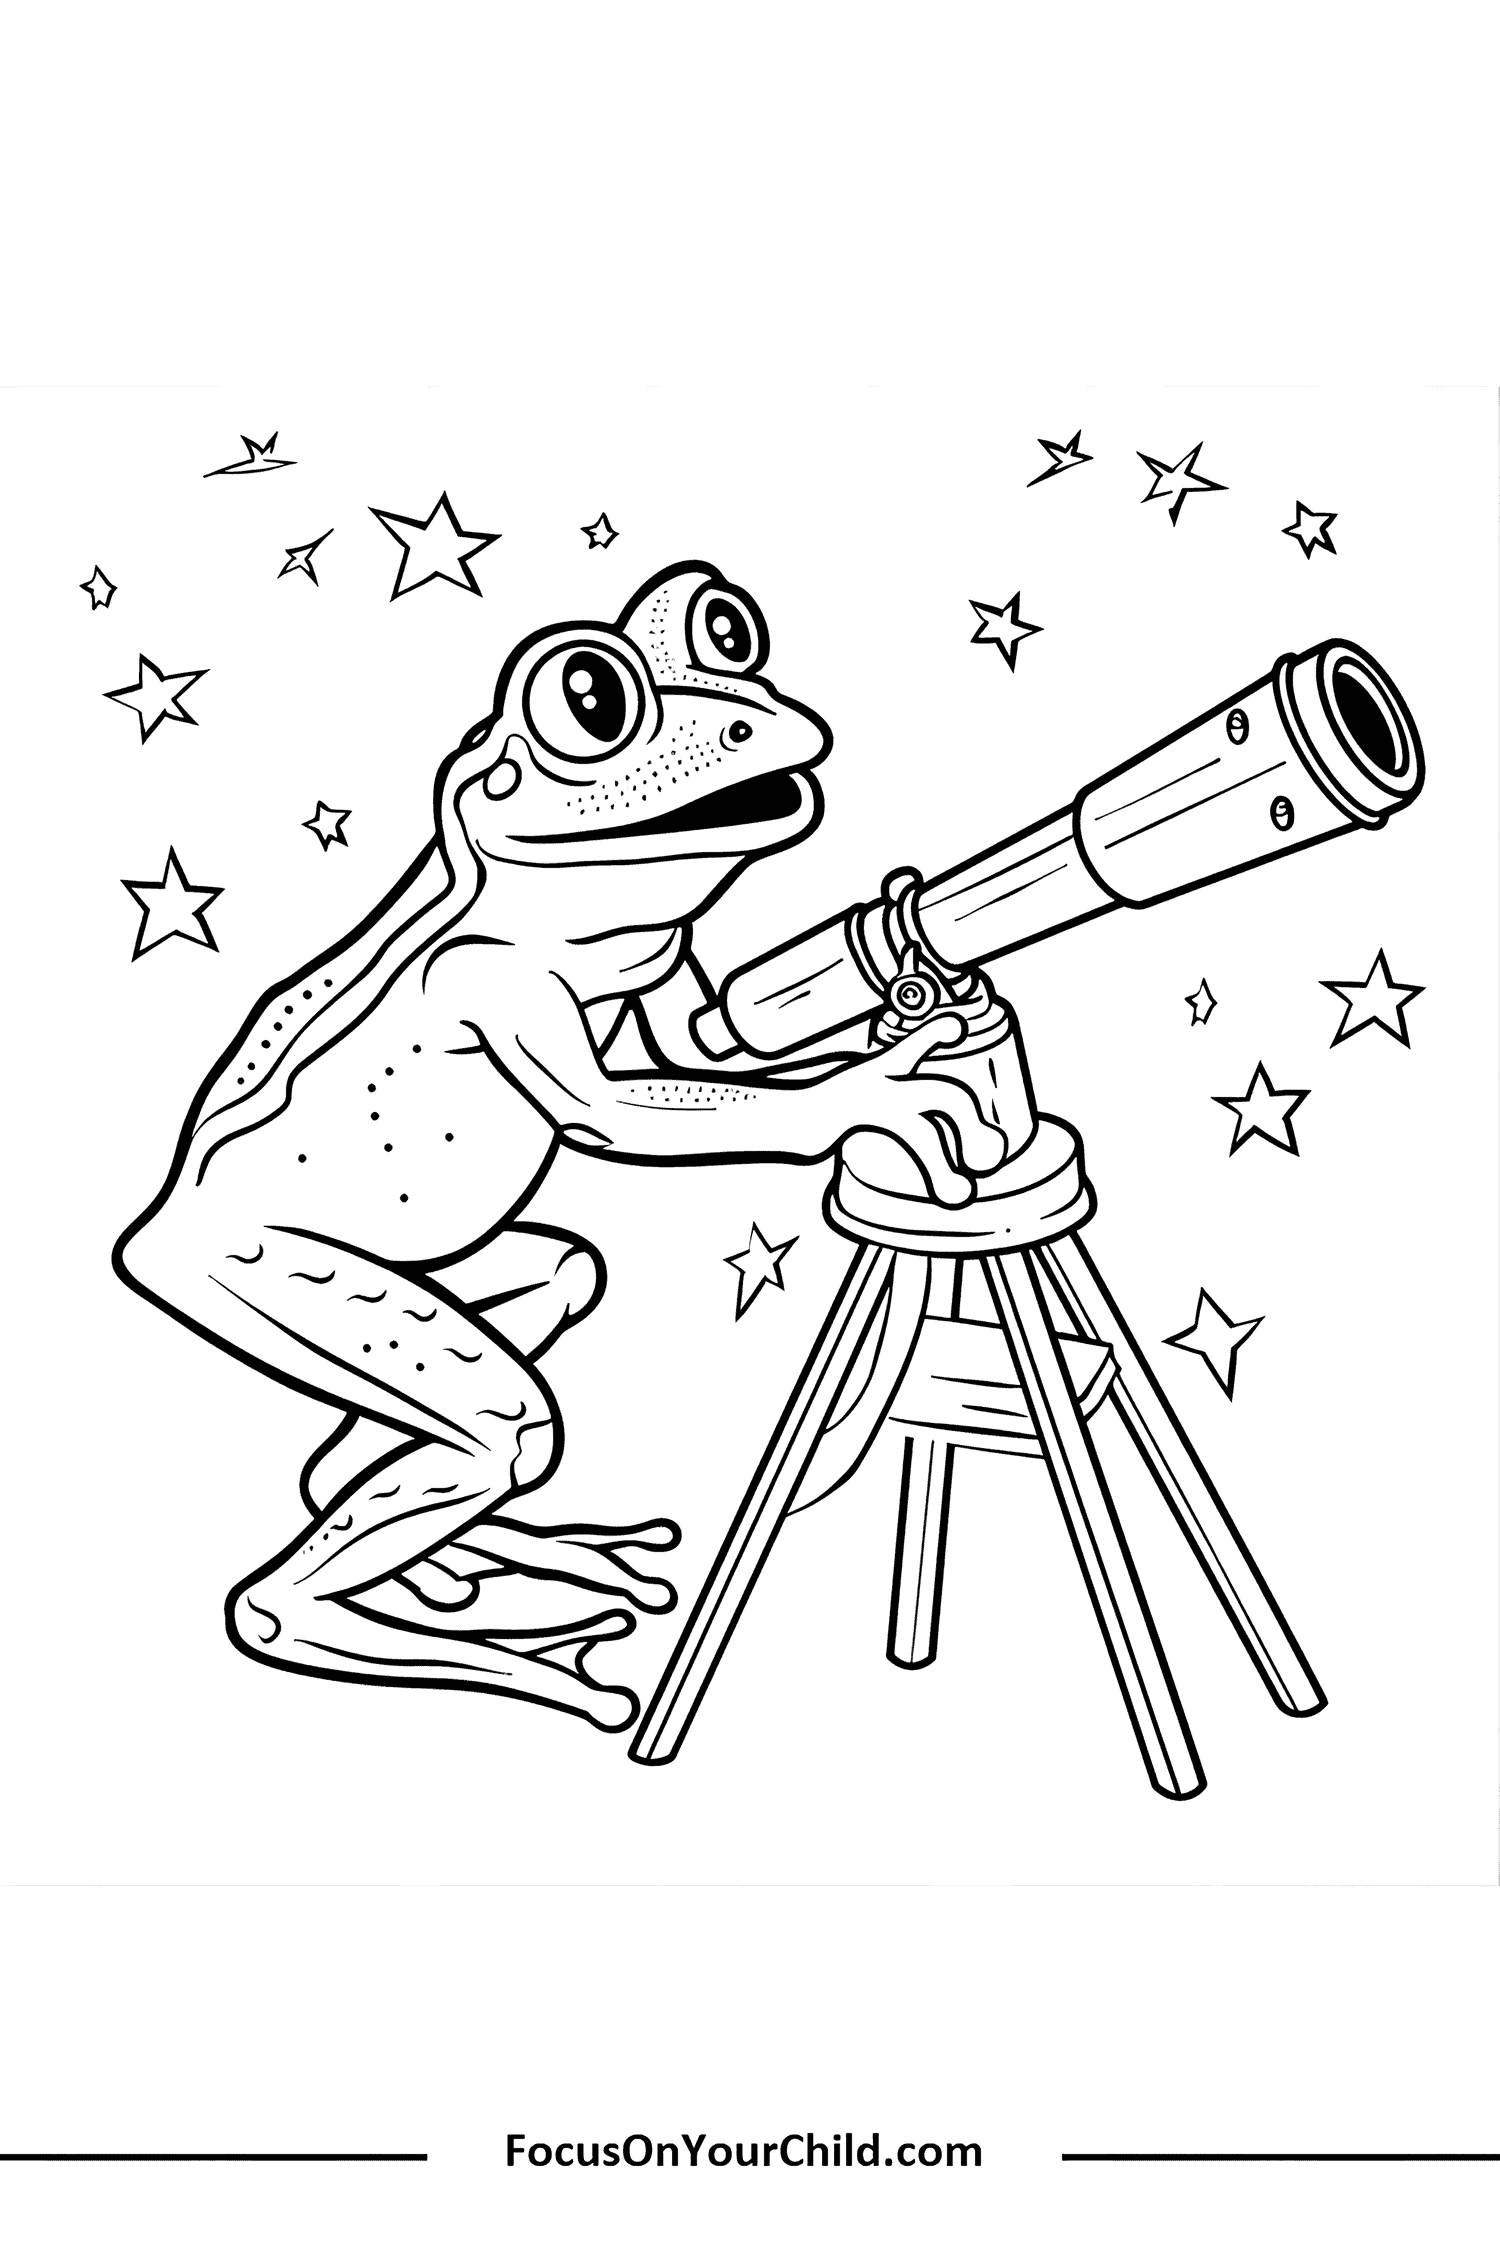 Frog stargazing through telescope, surrounded by stars.